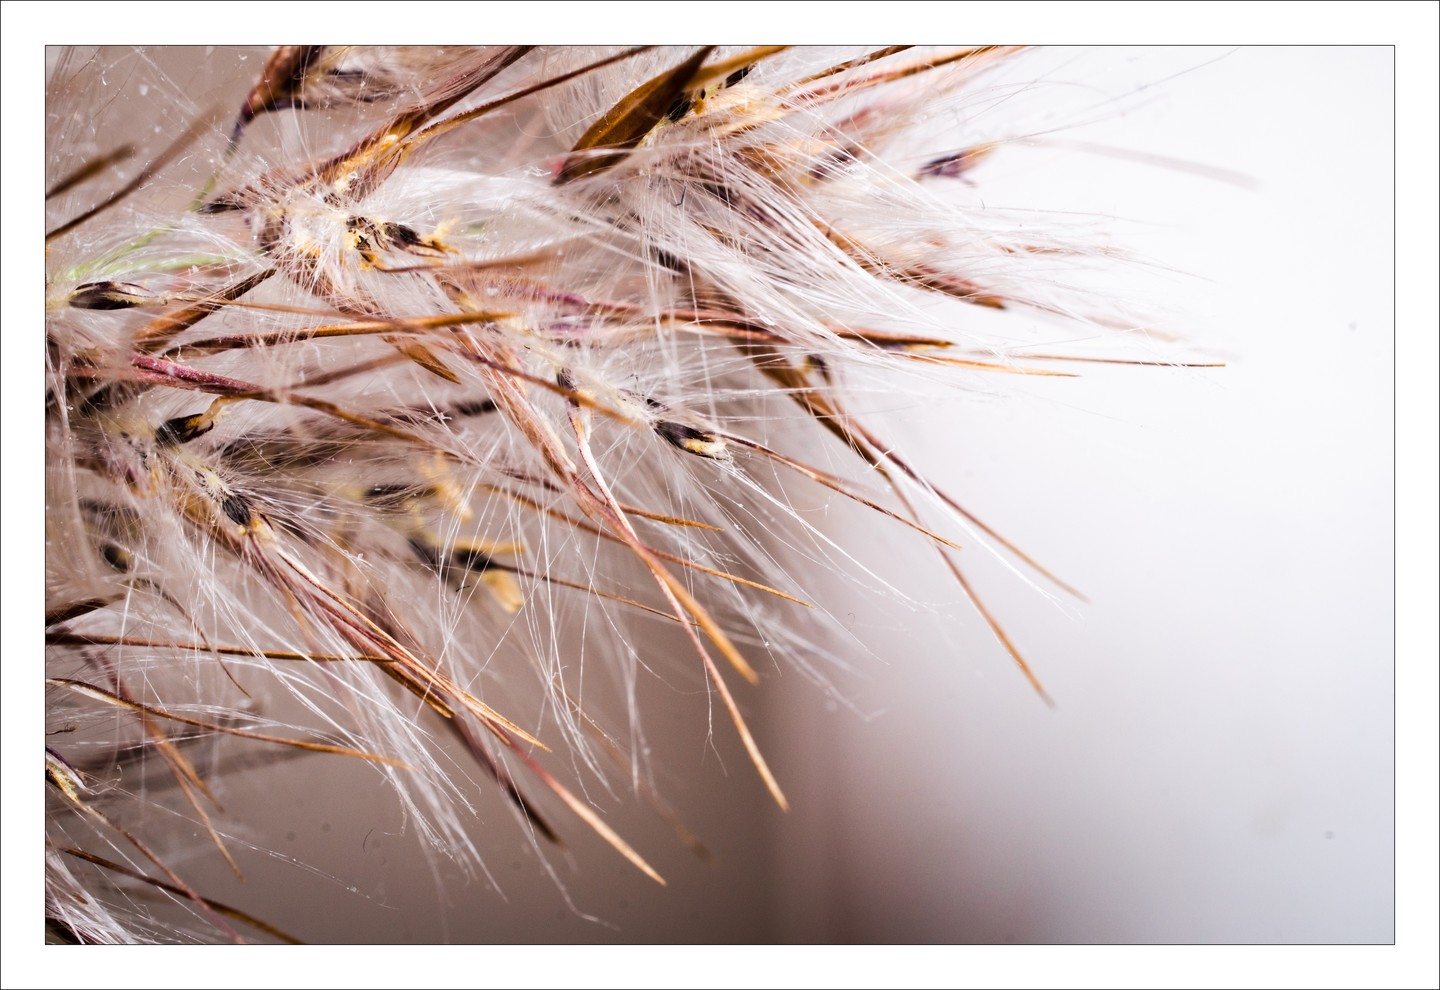 Still playing with #macro #lighting This time it's a bit of the #floof on the top of some #pampas #grass. Shot with a #Nikon #D5600 using a #Nikkor #Micro #40mm 2.8 with the onboard flash through a lens-mounted cloth #diffuser

#photography
#nikond5600
#macrophotography
#digital
#pampasgrass